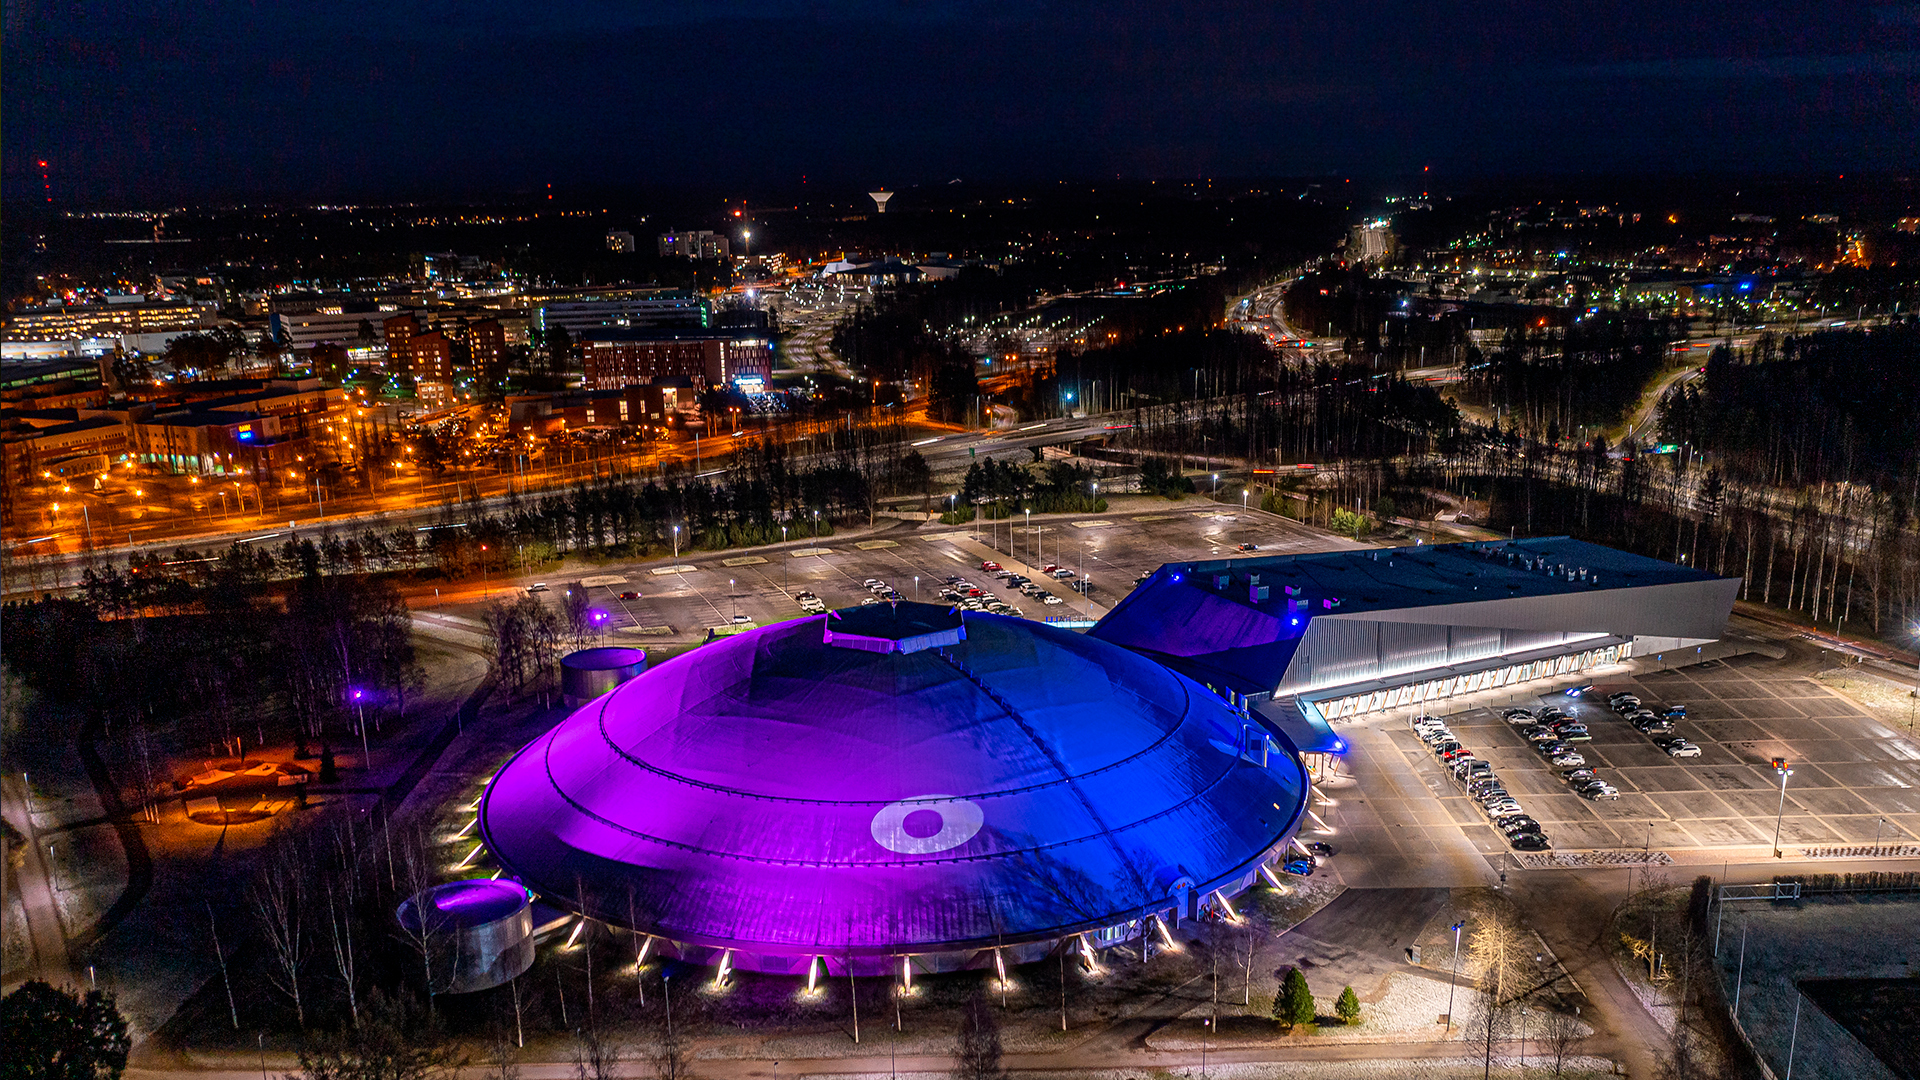 Ouluhalli arena and its surroundings photographed from the air. The roof of Ouluhalli has been coloured blue and violet with lights, and the degree sign of Oulu brand has also been created on the roof with lights.